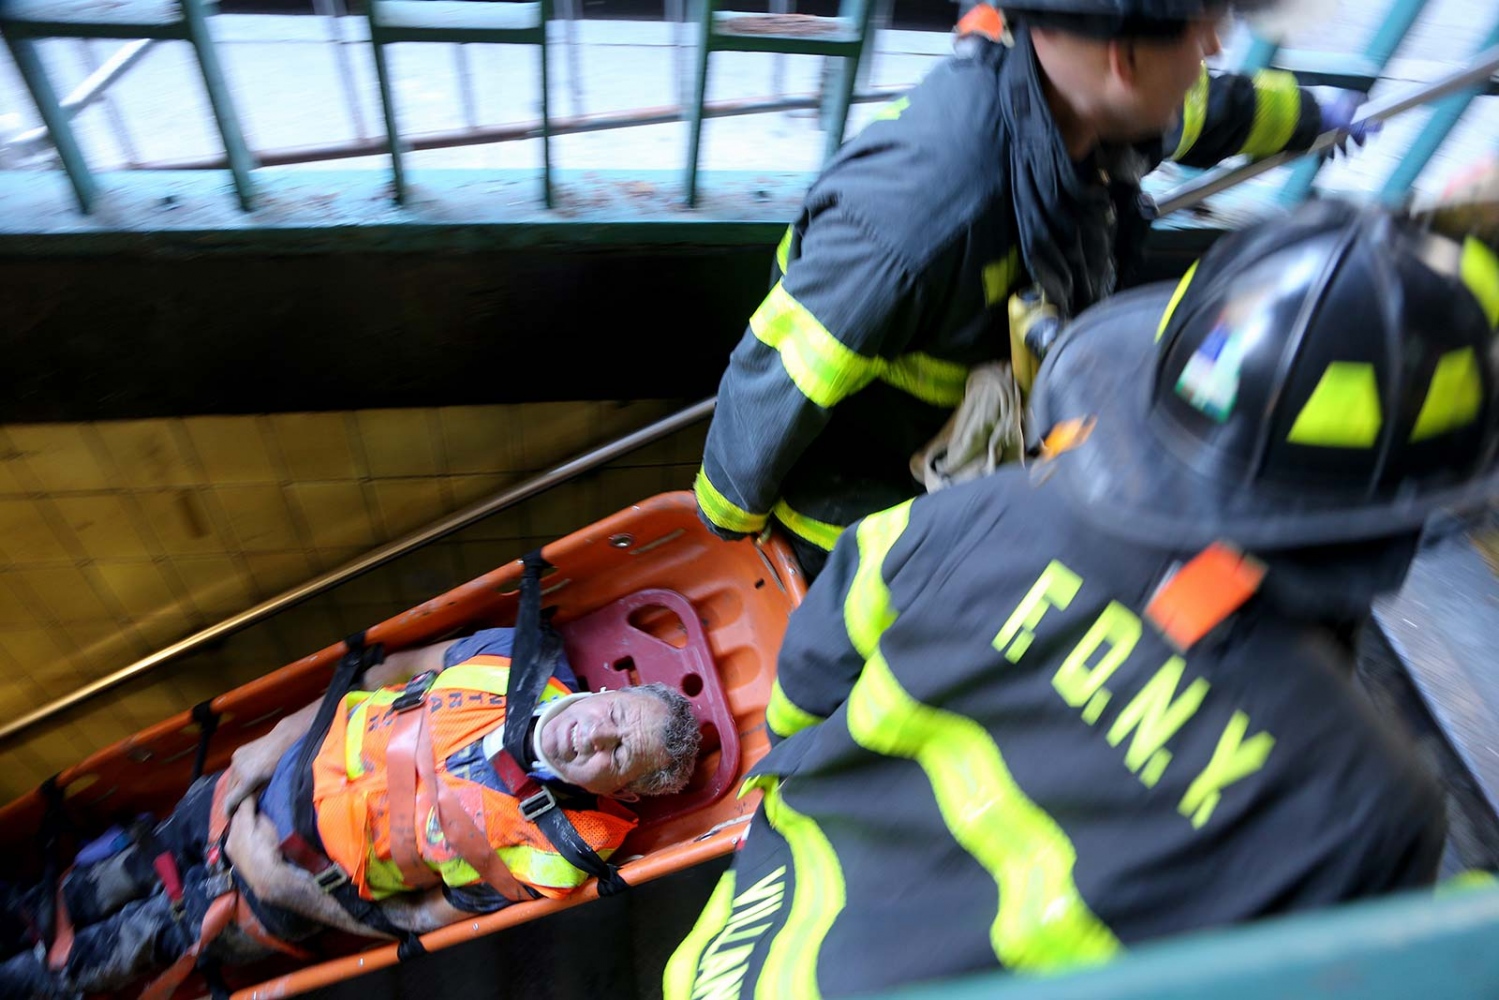 Image from Photojournalism -  Firefighters rescue an MTA worker who fell on subway...